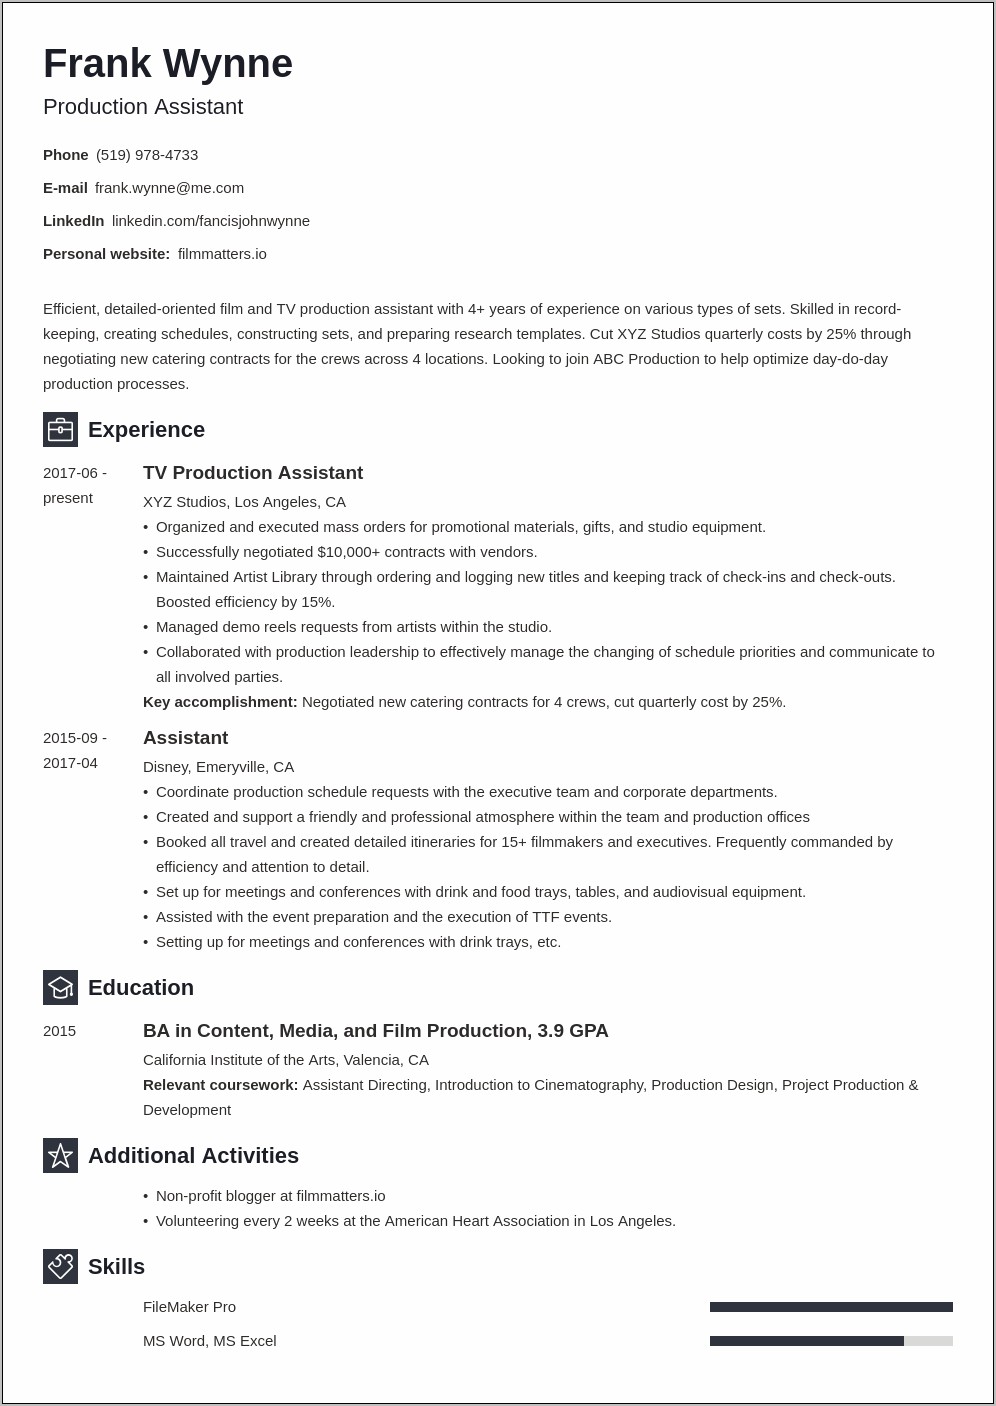 Production Assistant Entry Level Resume Career Objective